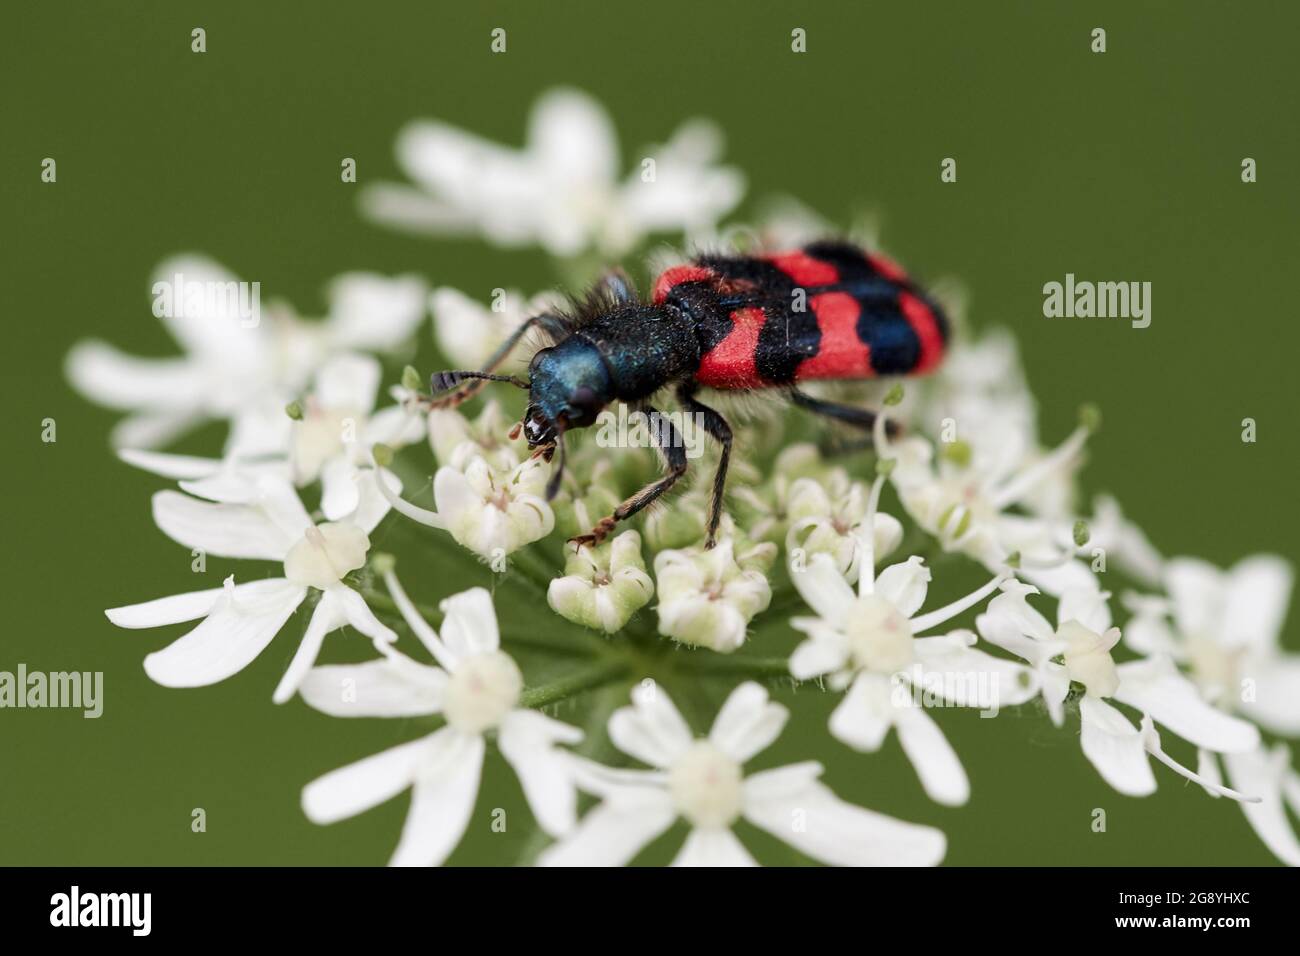 Trichodes apiarius, hairy small beetle with bright red colour and black bands crawling on a white wild flower. Stock Photo